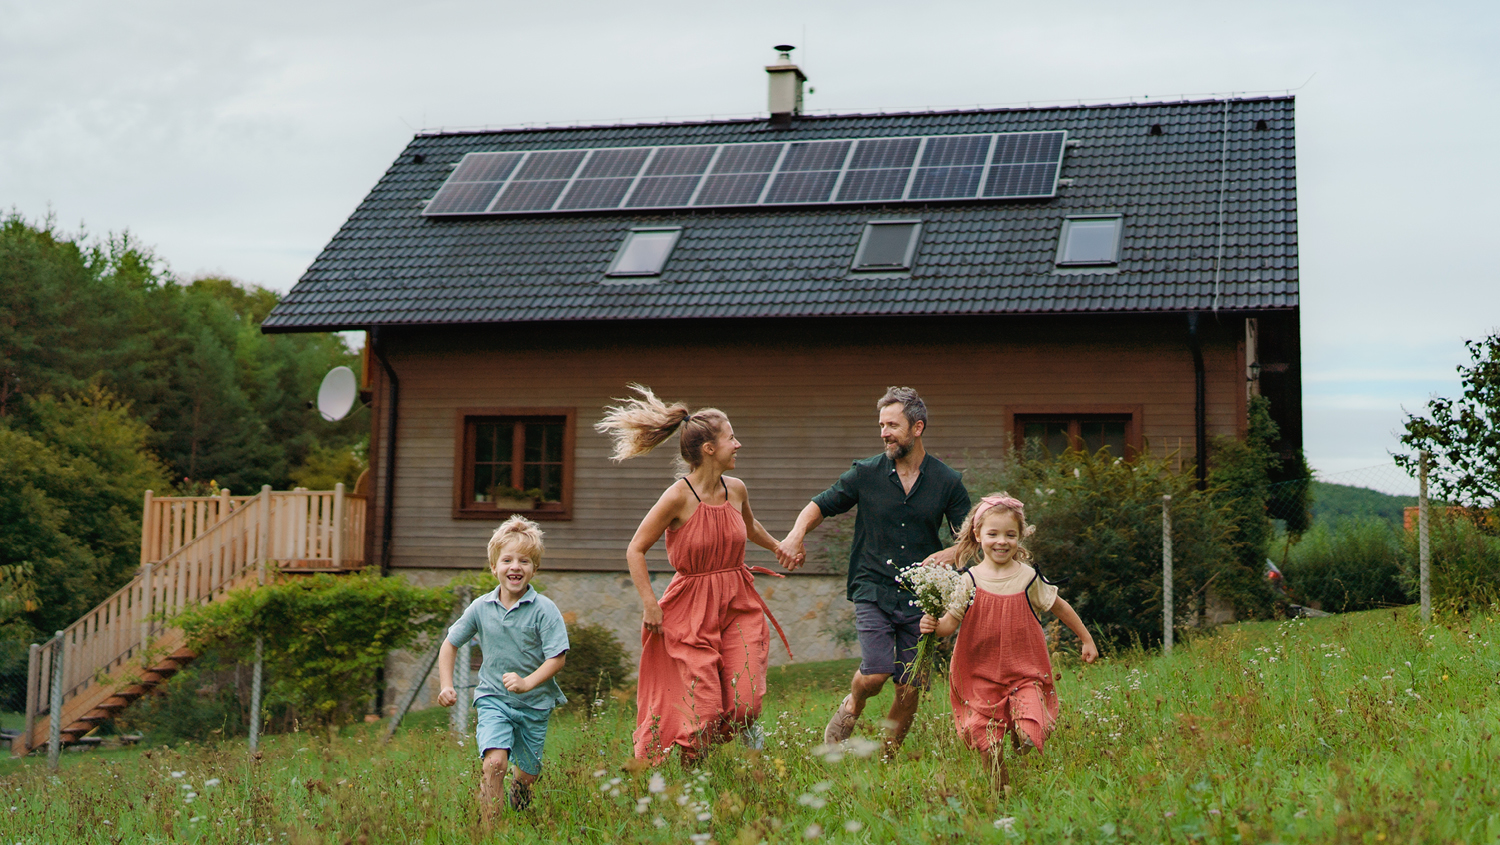 A family of four run in a green field in front of a wooden house with solar panels on the roof. The parents hold hands and the boy and girl run ahead of them, the girl with flowers in her hand. 